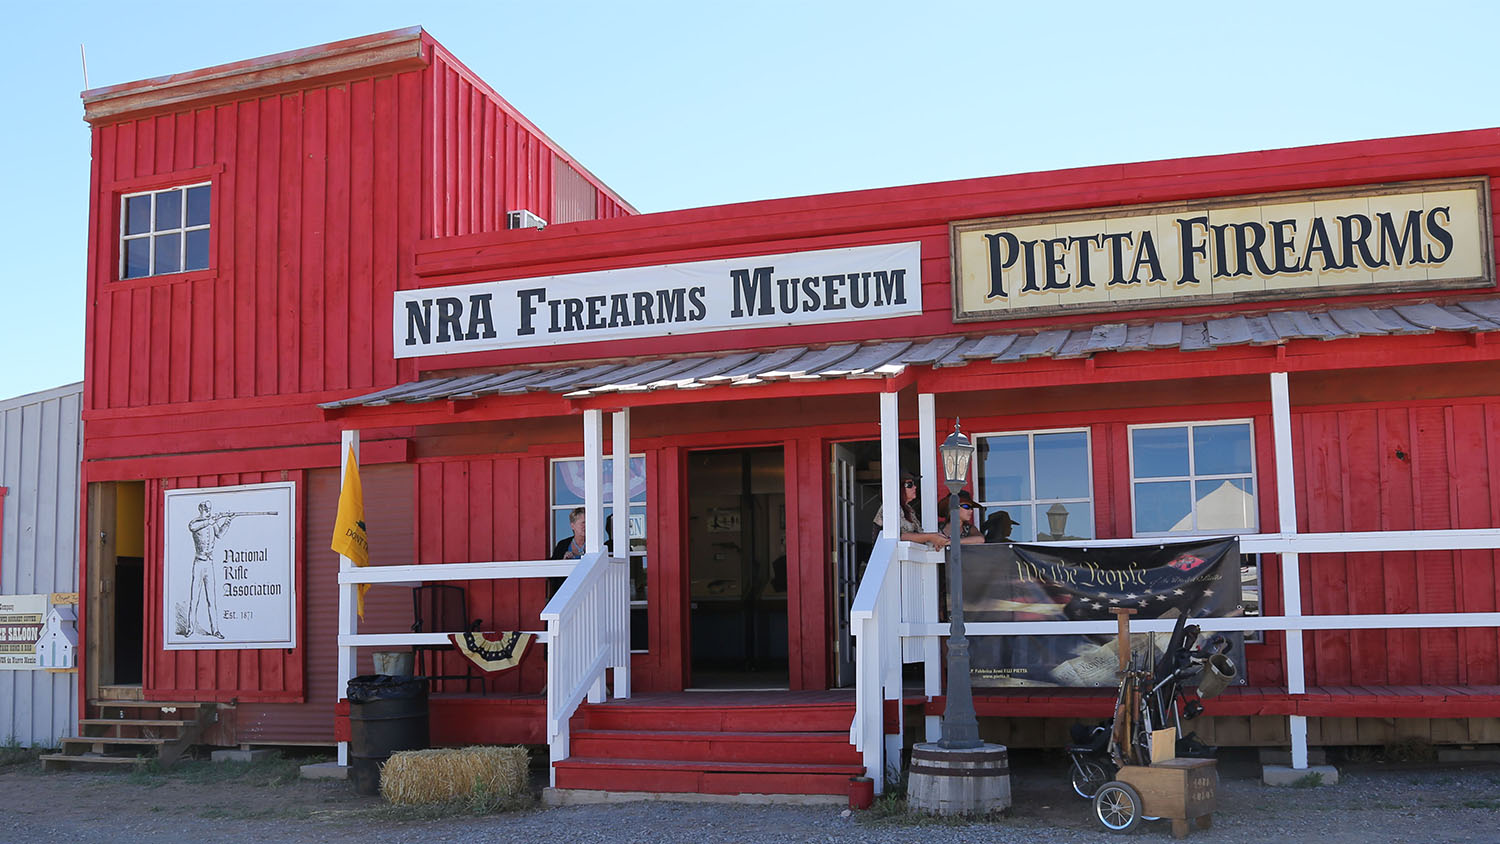 NRA Firearms Museum Pop Up at End of Trail